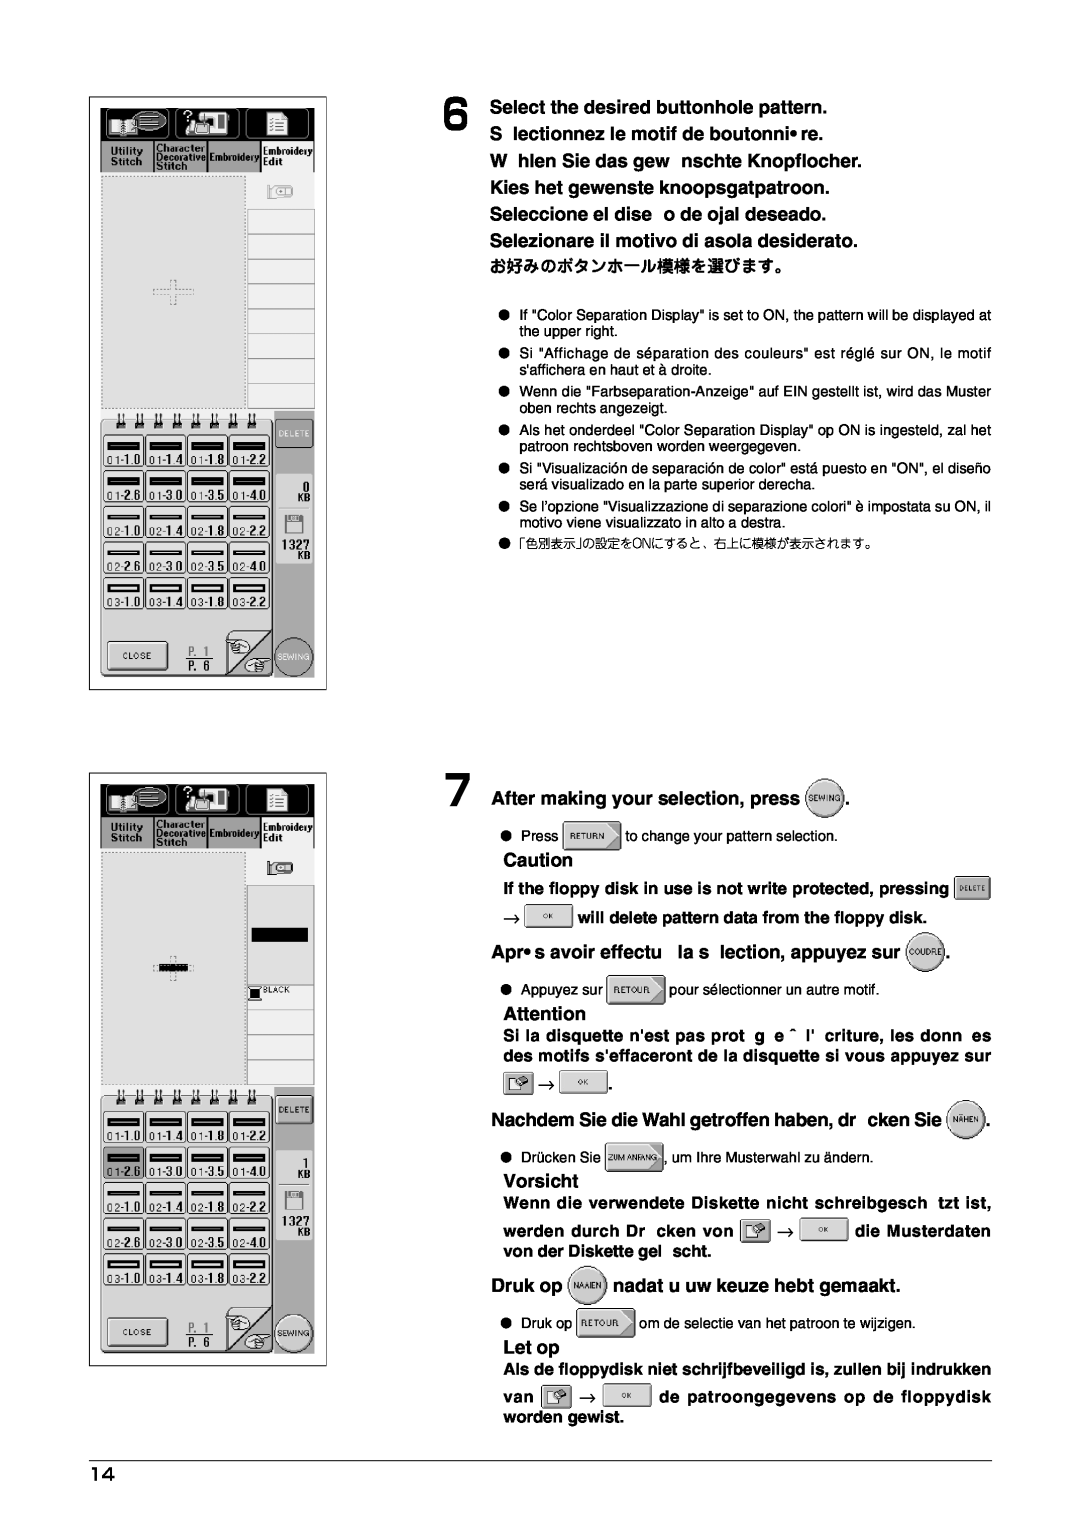 Brother Button Hole Kit operation manual お好みのボタンホール模様を選びます。, If the floppy disk in use is not write protected, pressing 